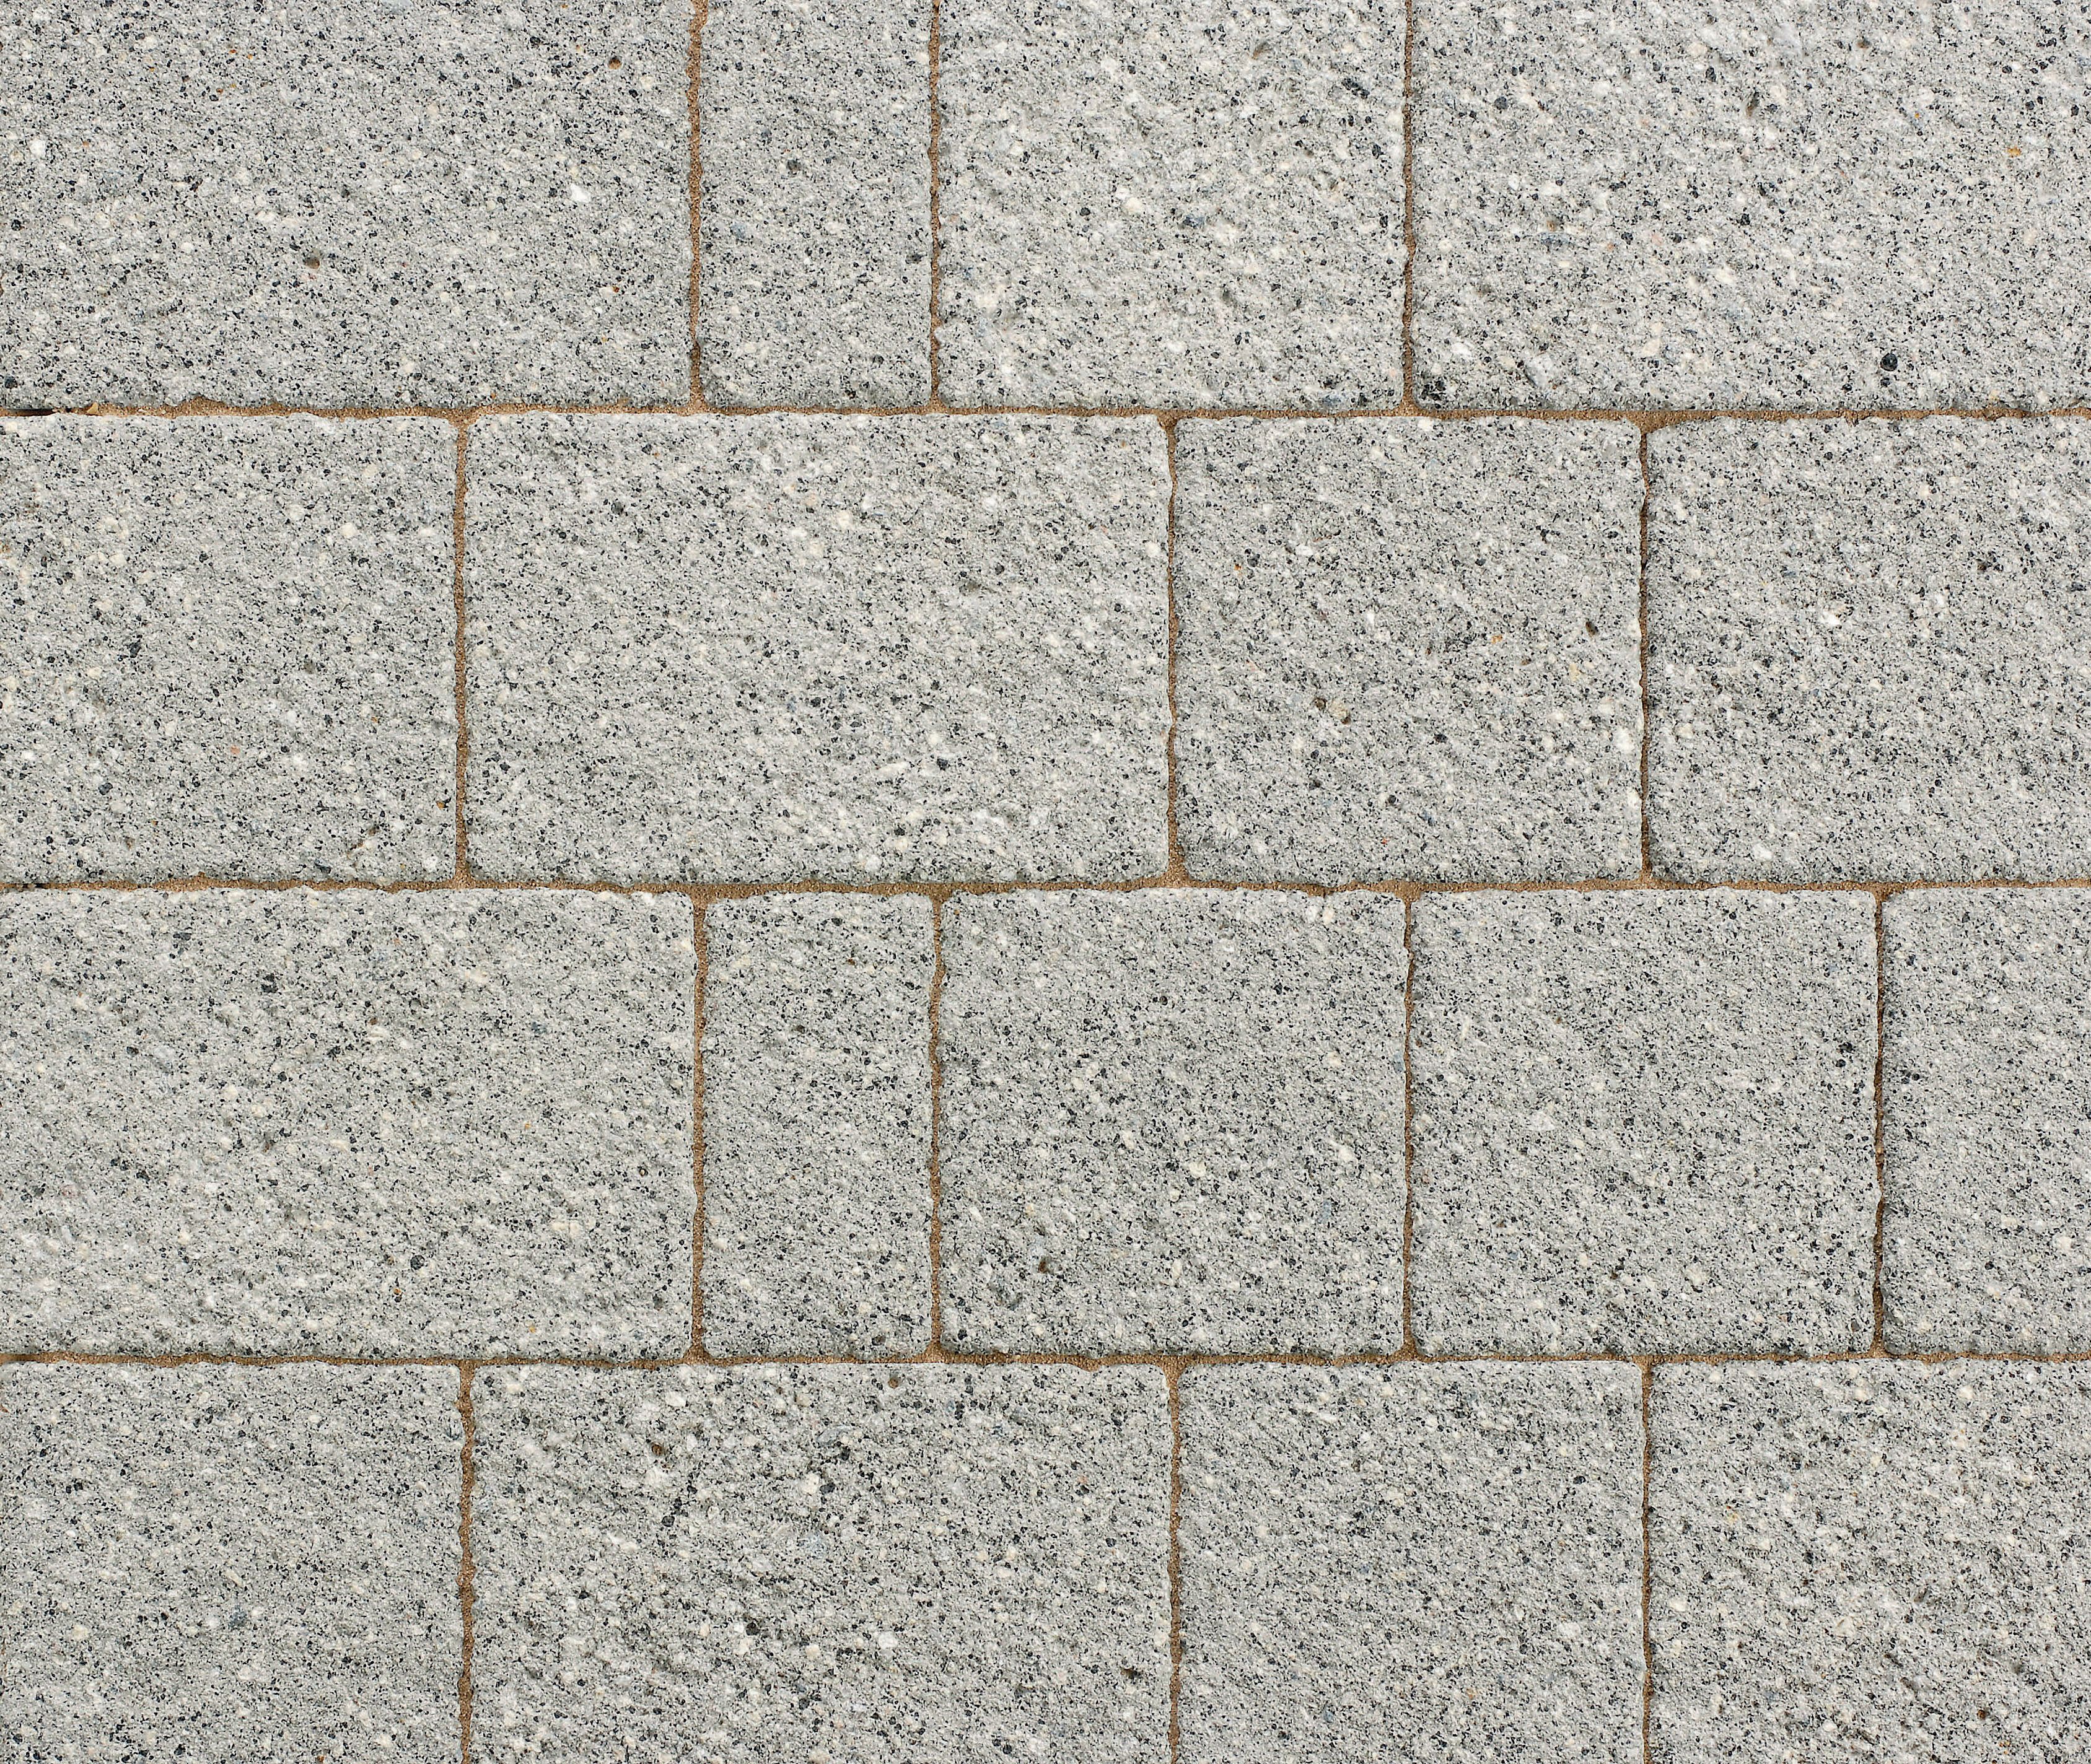 Image of Marshalls Argent Driveway Block Paving Pack Mixed Size Light Grey - Sample